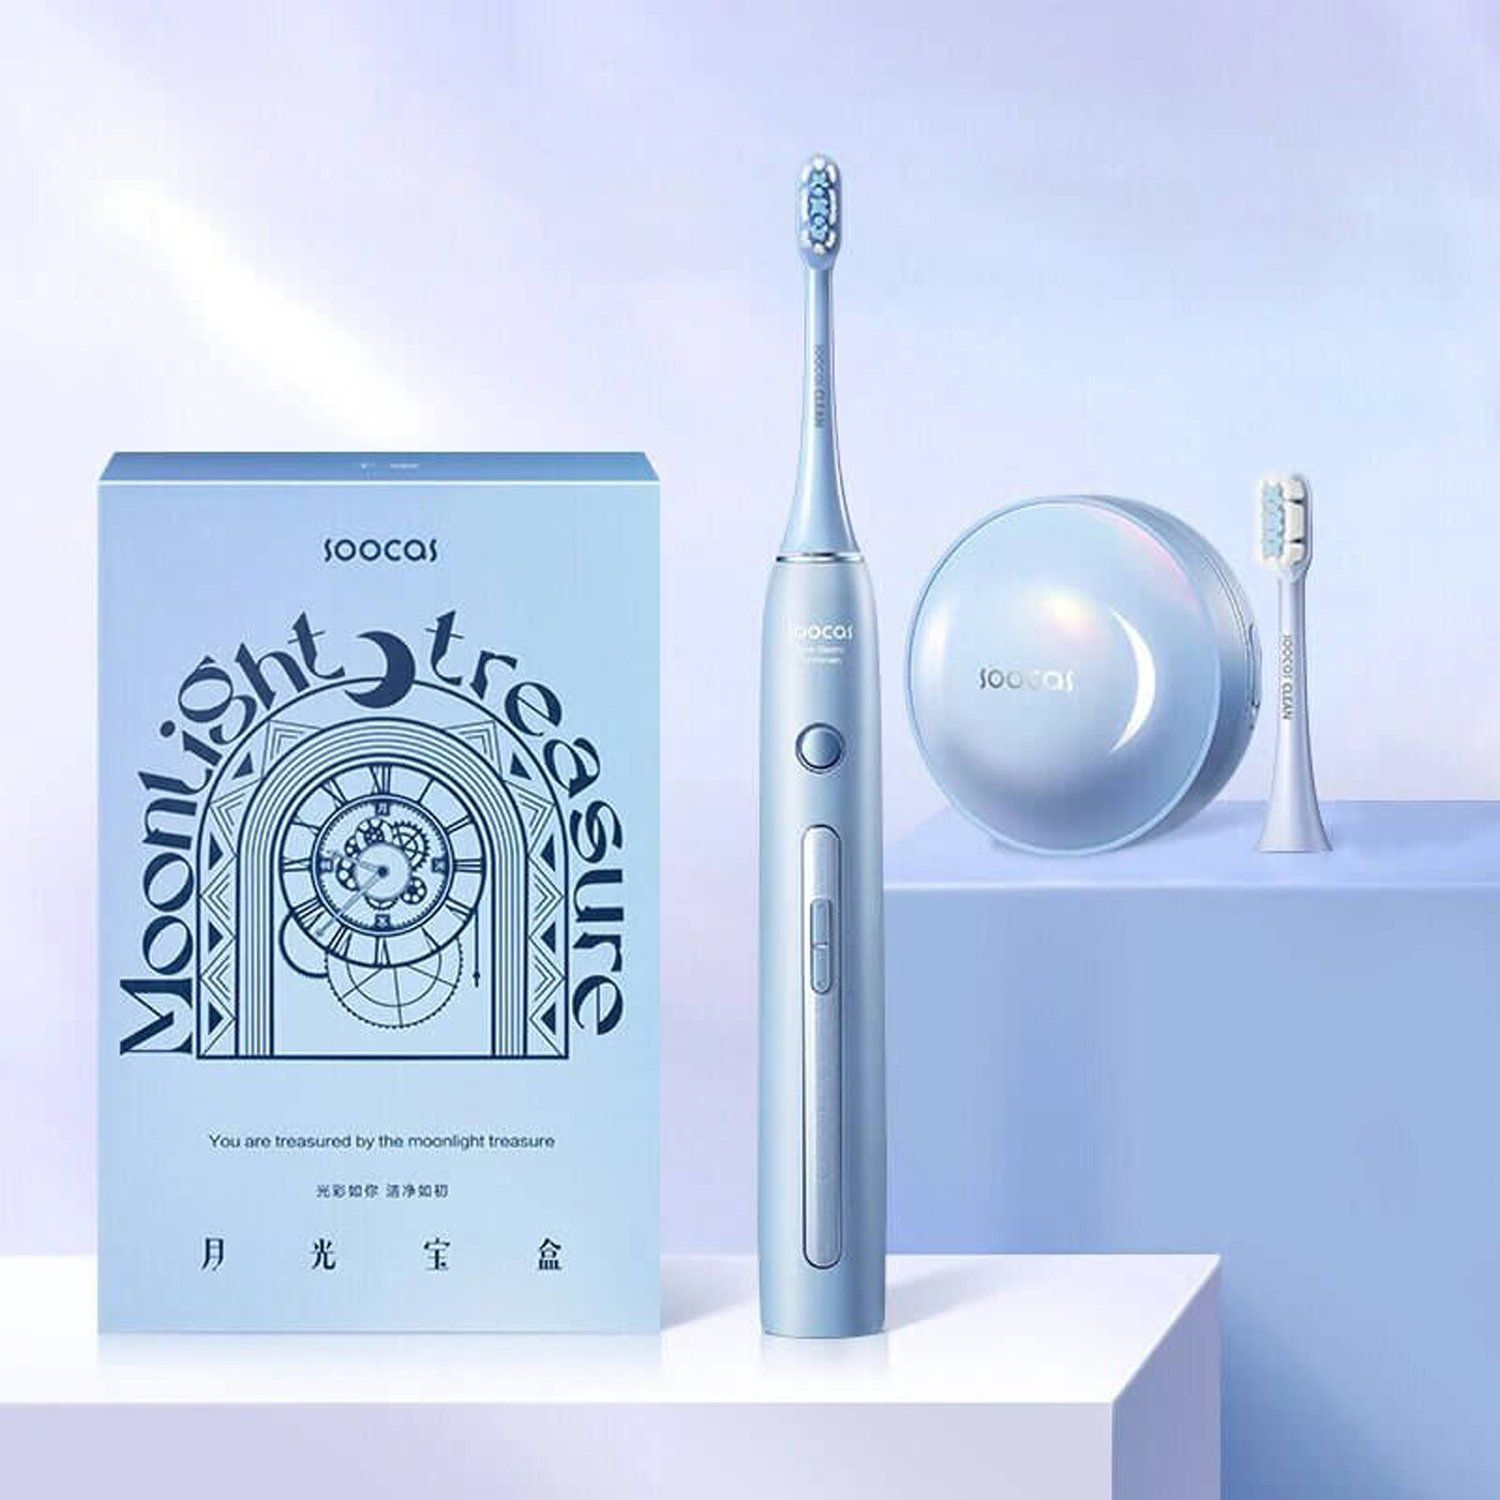 SOOCAS X3Pro Sonic Electric Toothbrush Whitening Sterilization with UVC Disinfection Box Default SOOCAS 